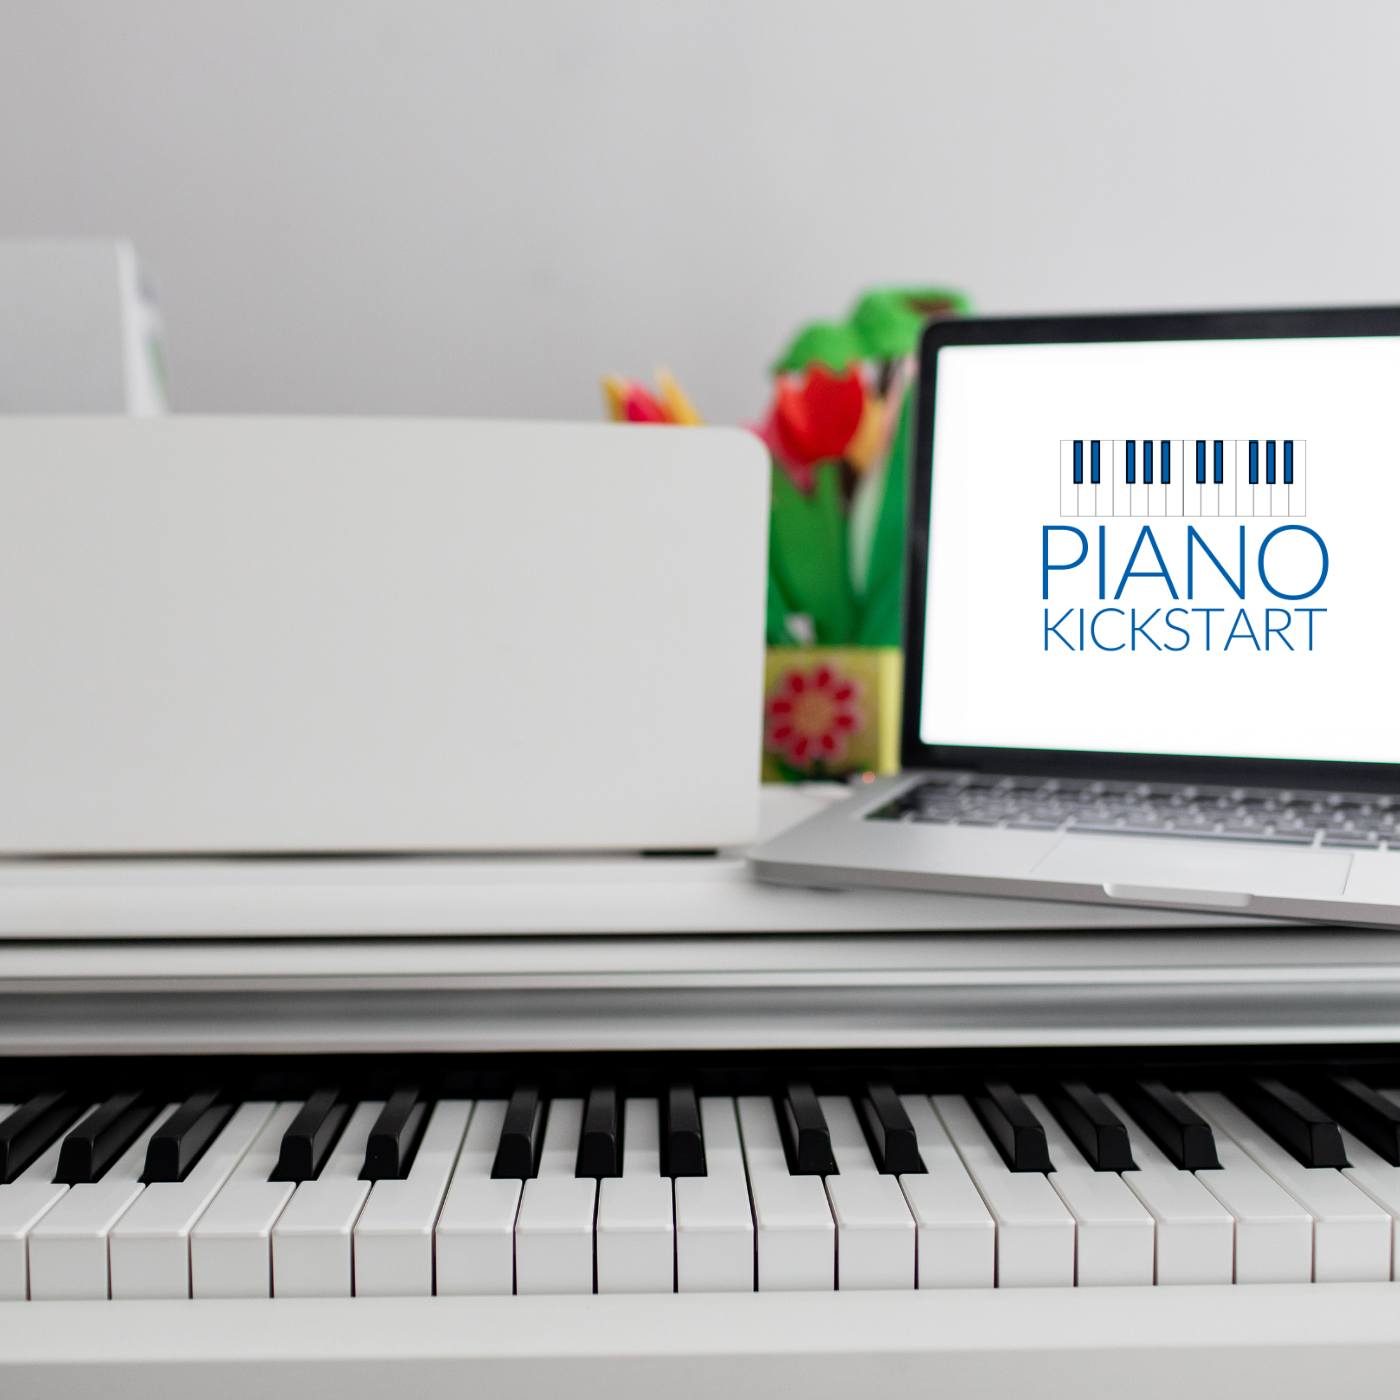 Online piano course with Piano Kickstart